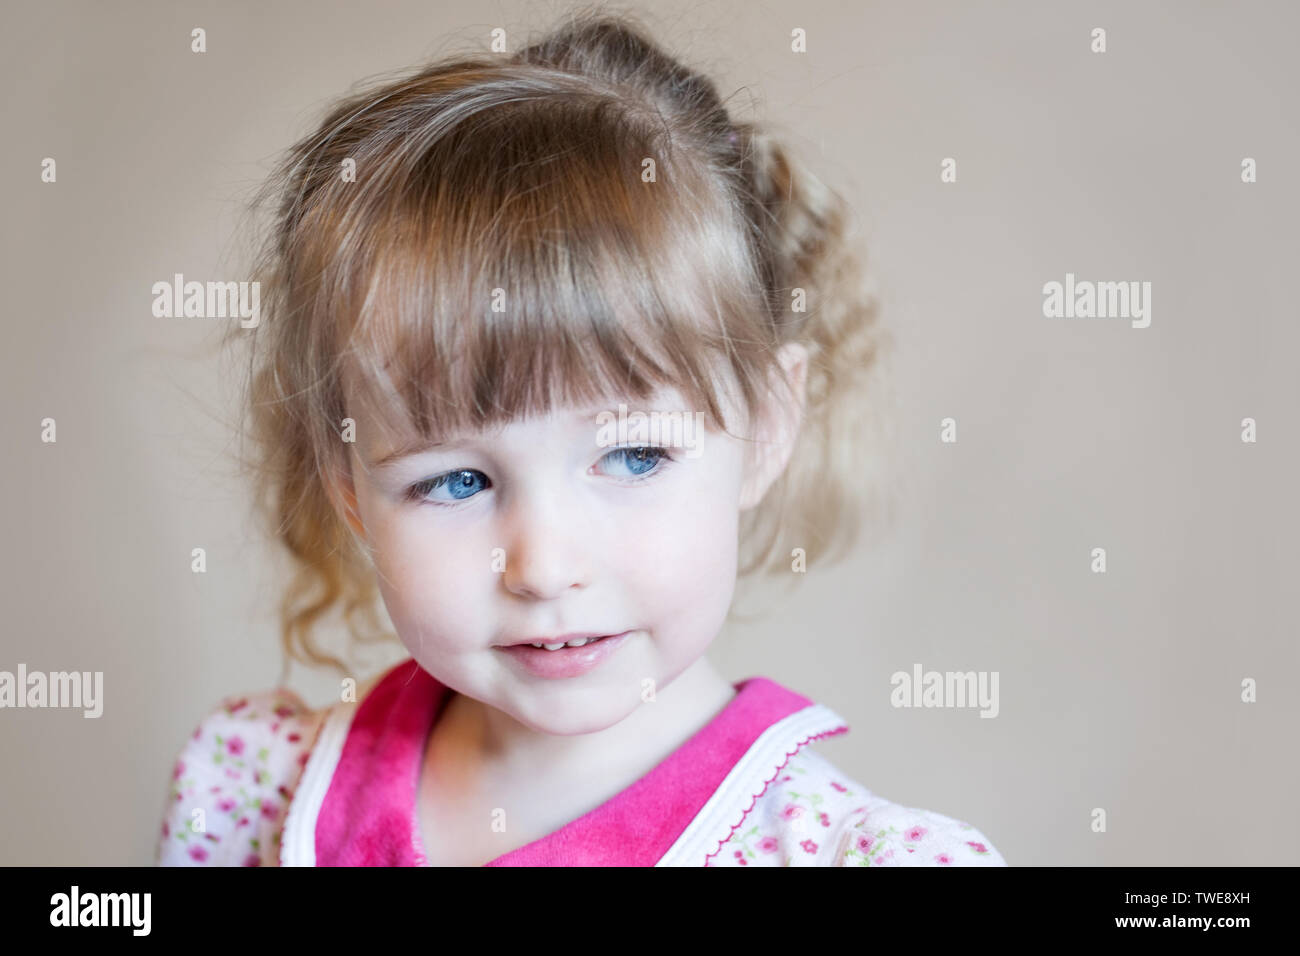 beautiful white child girl face closeup portrait on beige wall background Stock Photo